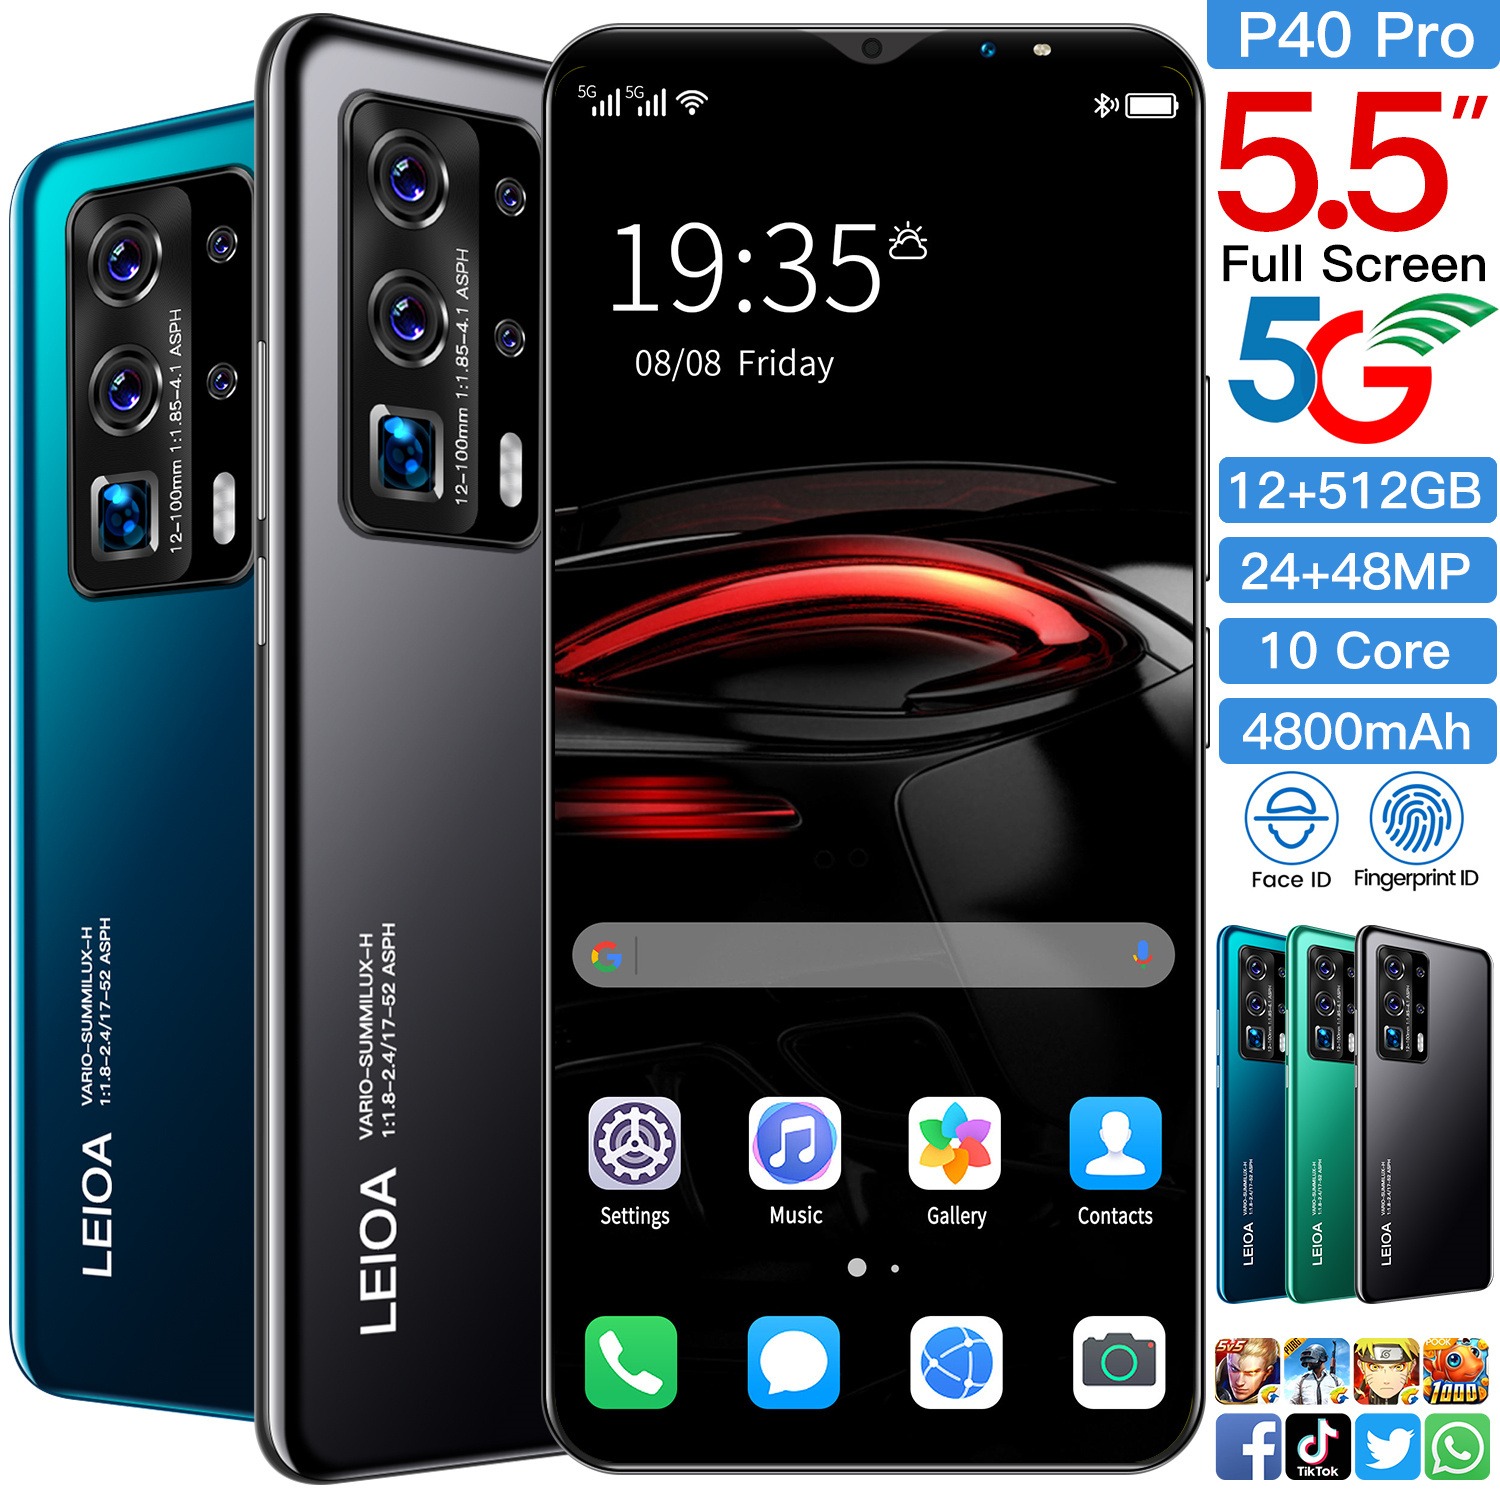 Galxy P40 Pro 5G 5.5 Inch Screen Smartphone Android 10.0 Cellphone 24+48MP 10 Core Unlock Mobilephone 4800mAh Battery Face ID